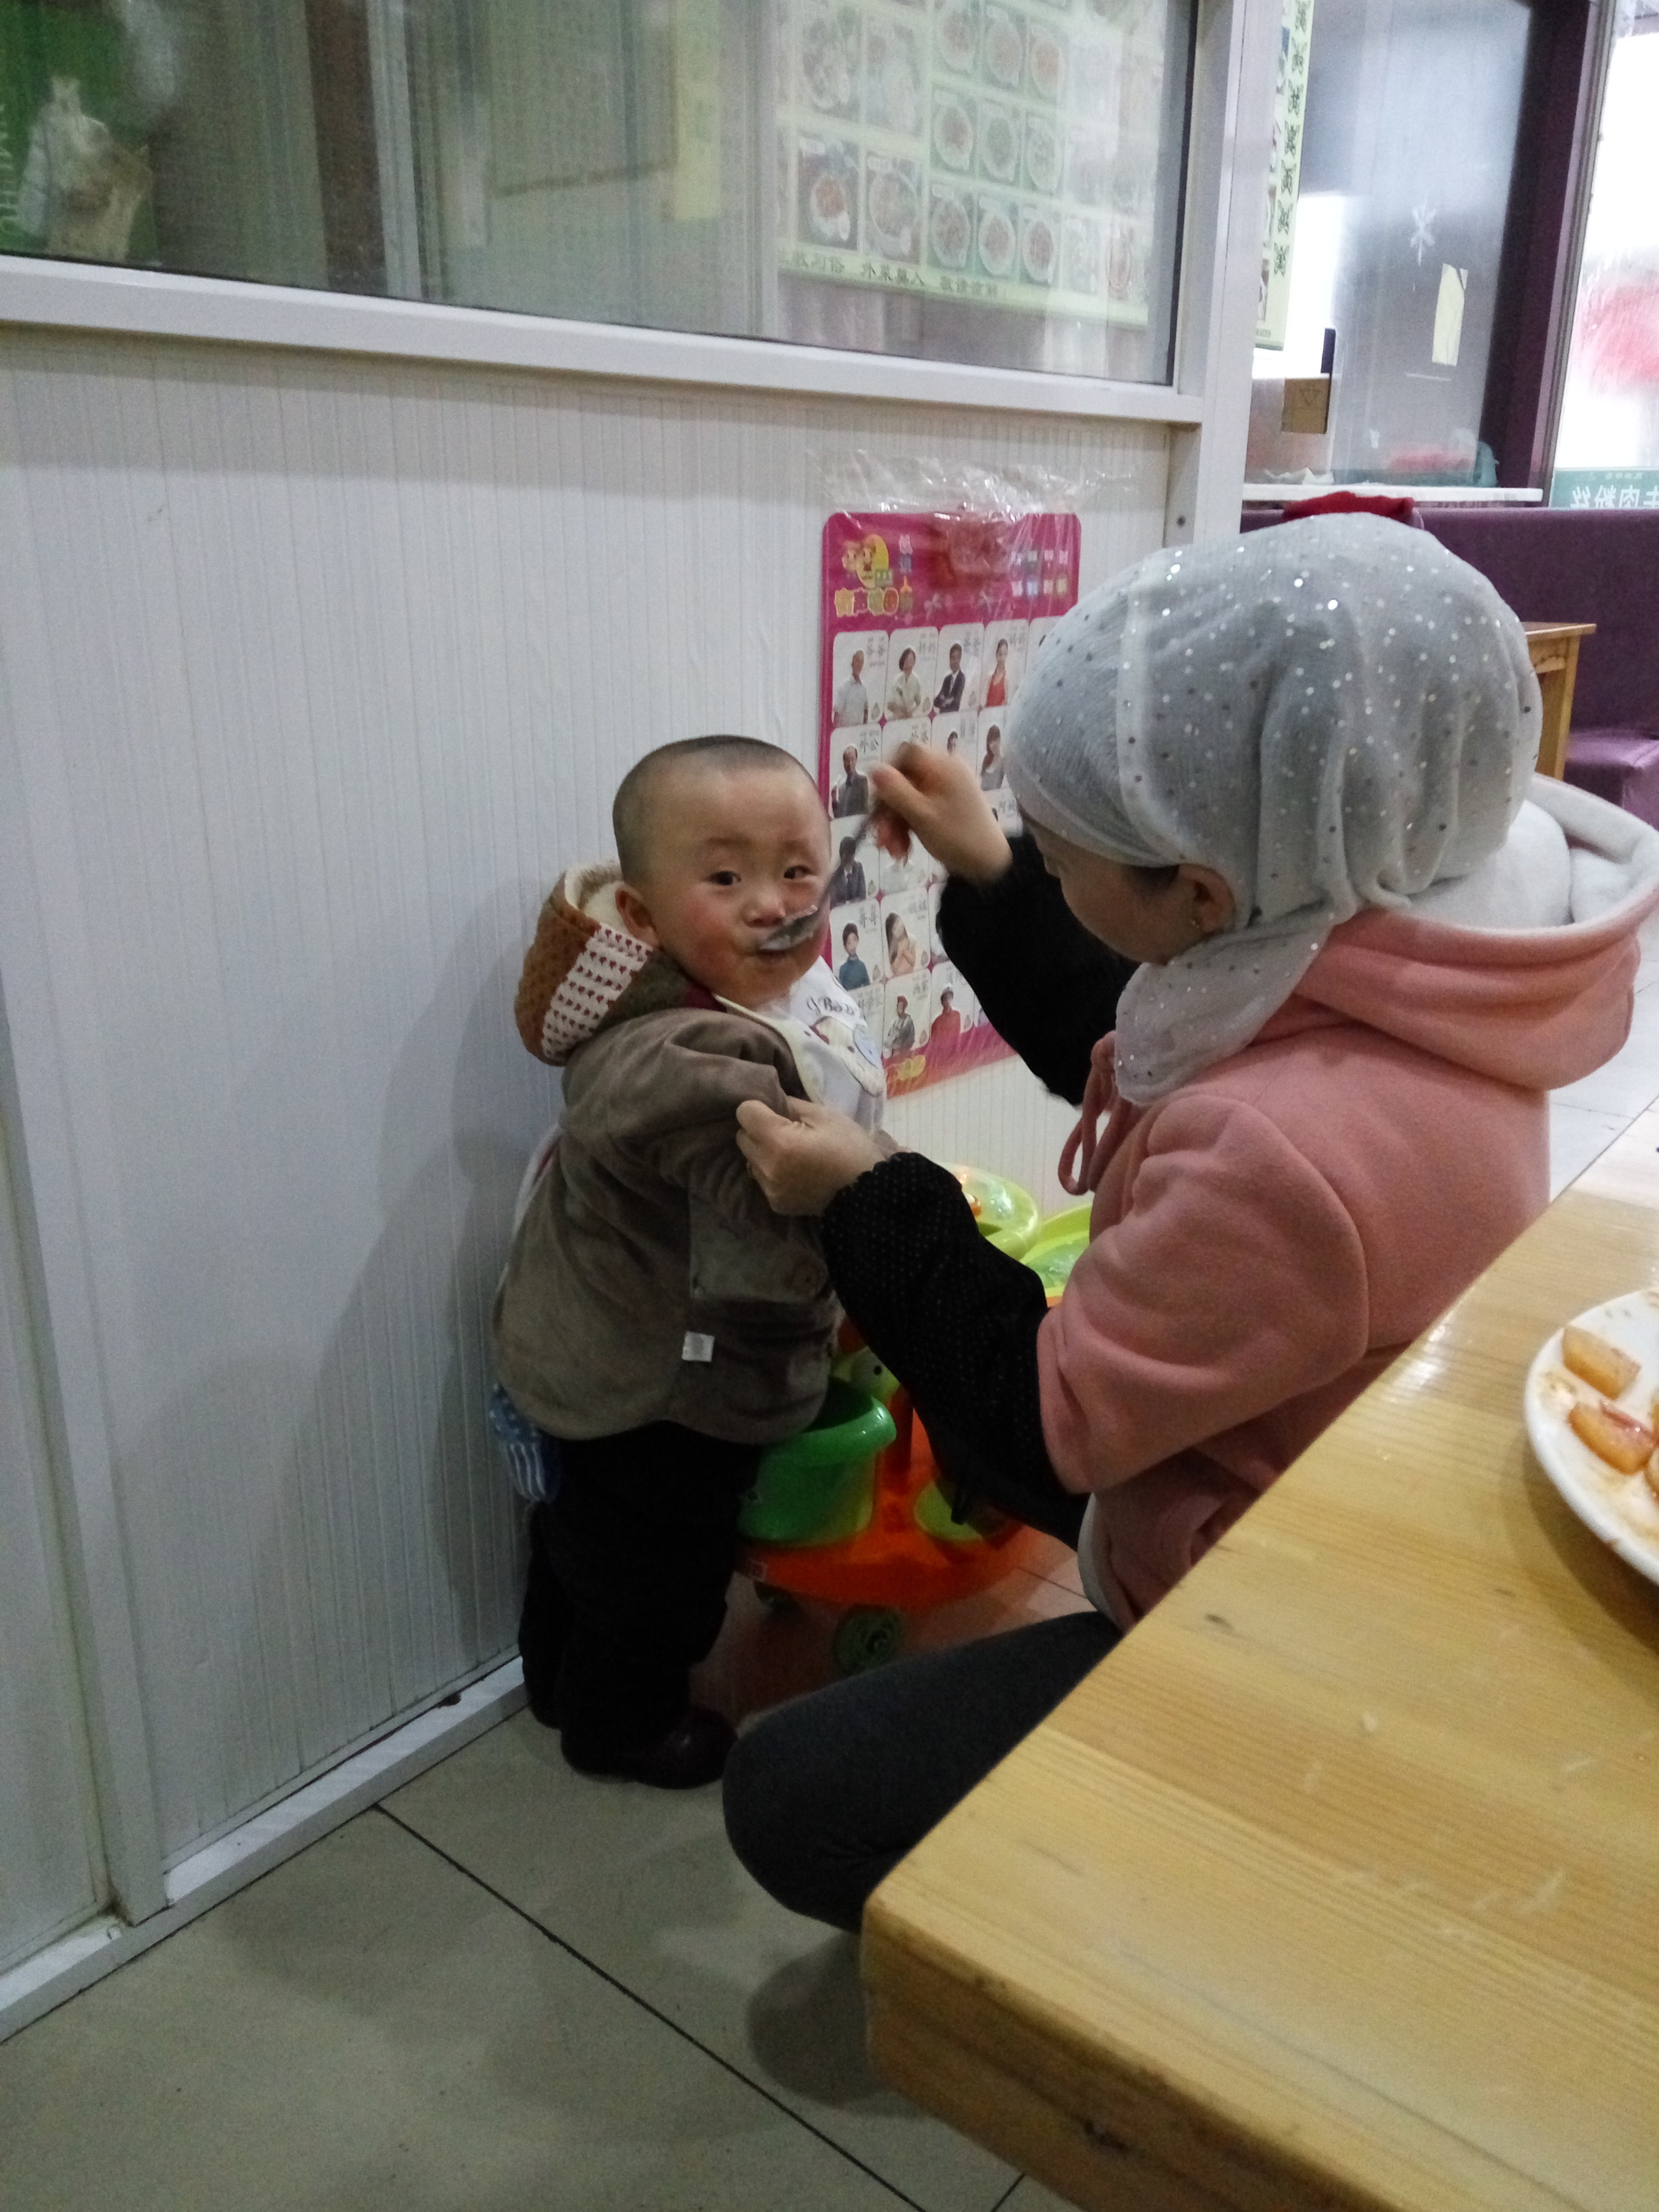 At another Muslim restaurant I watch a young mother wrangle in her son for dinner time.